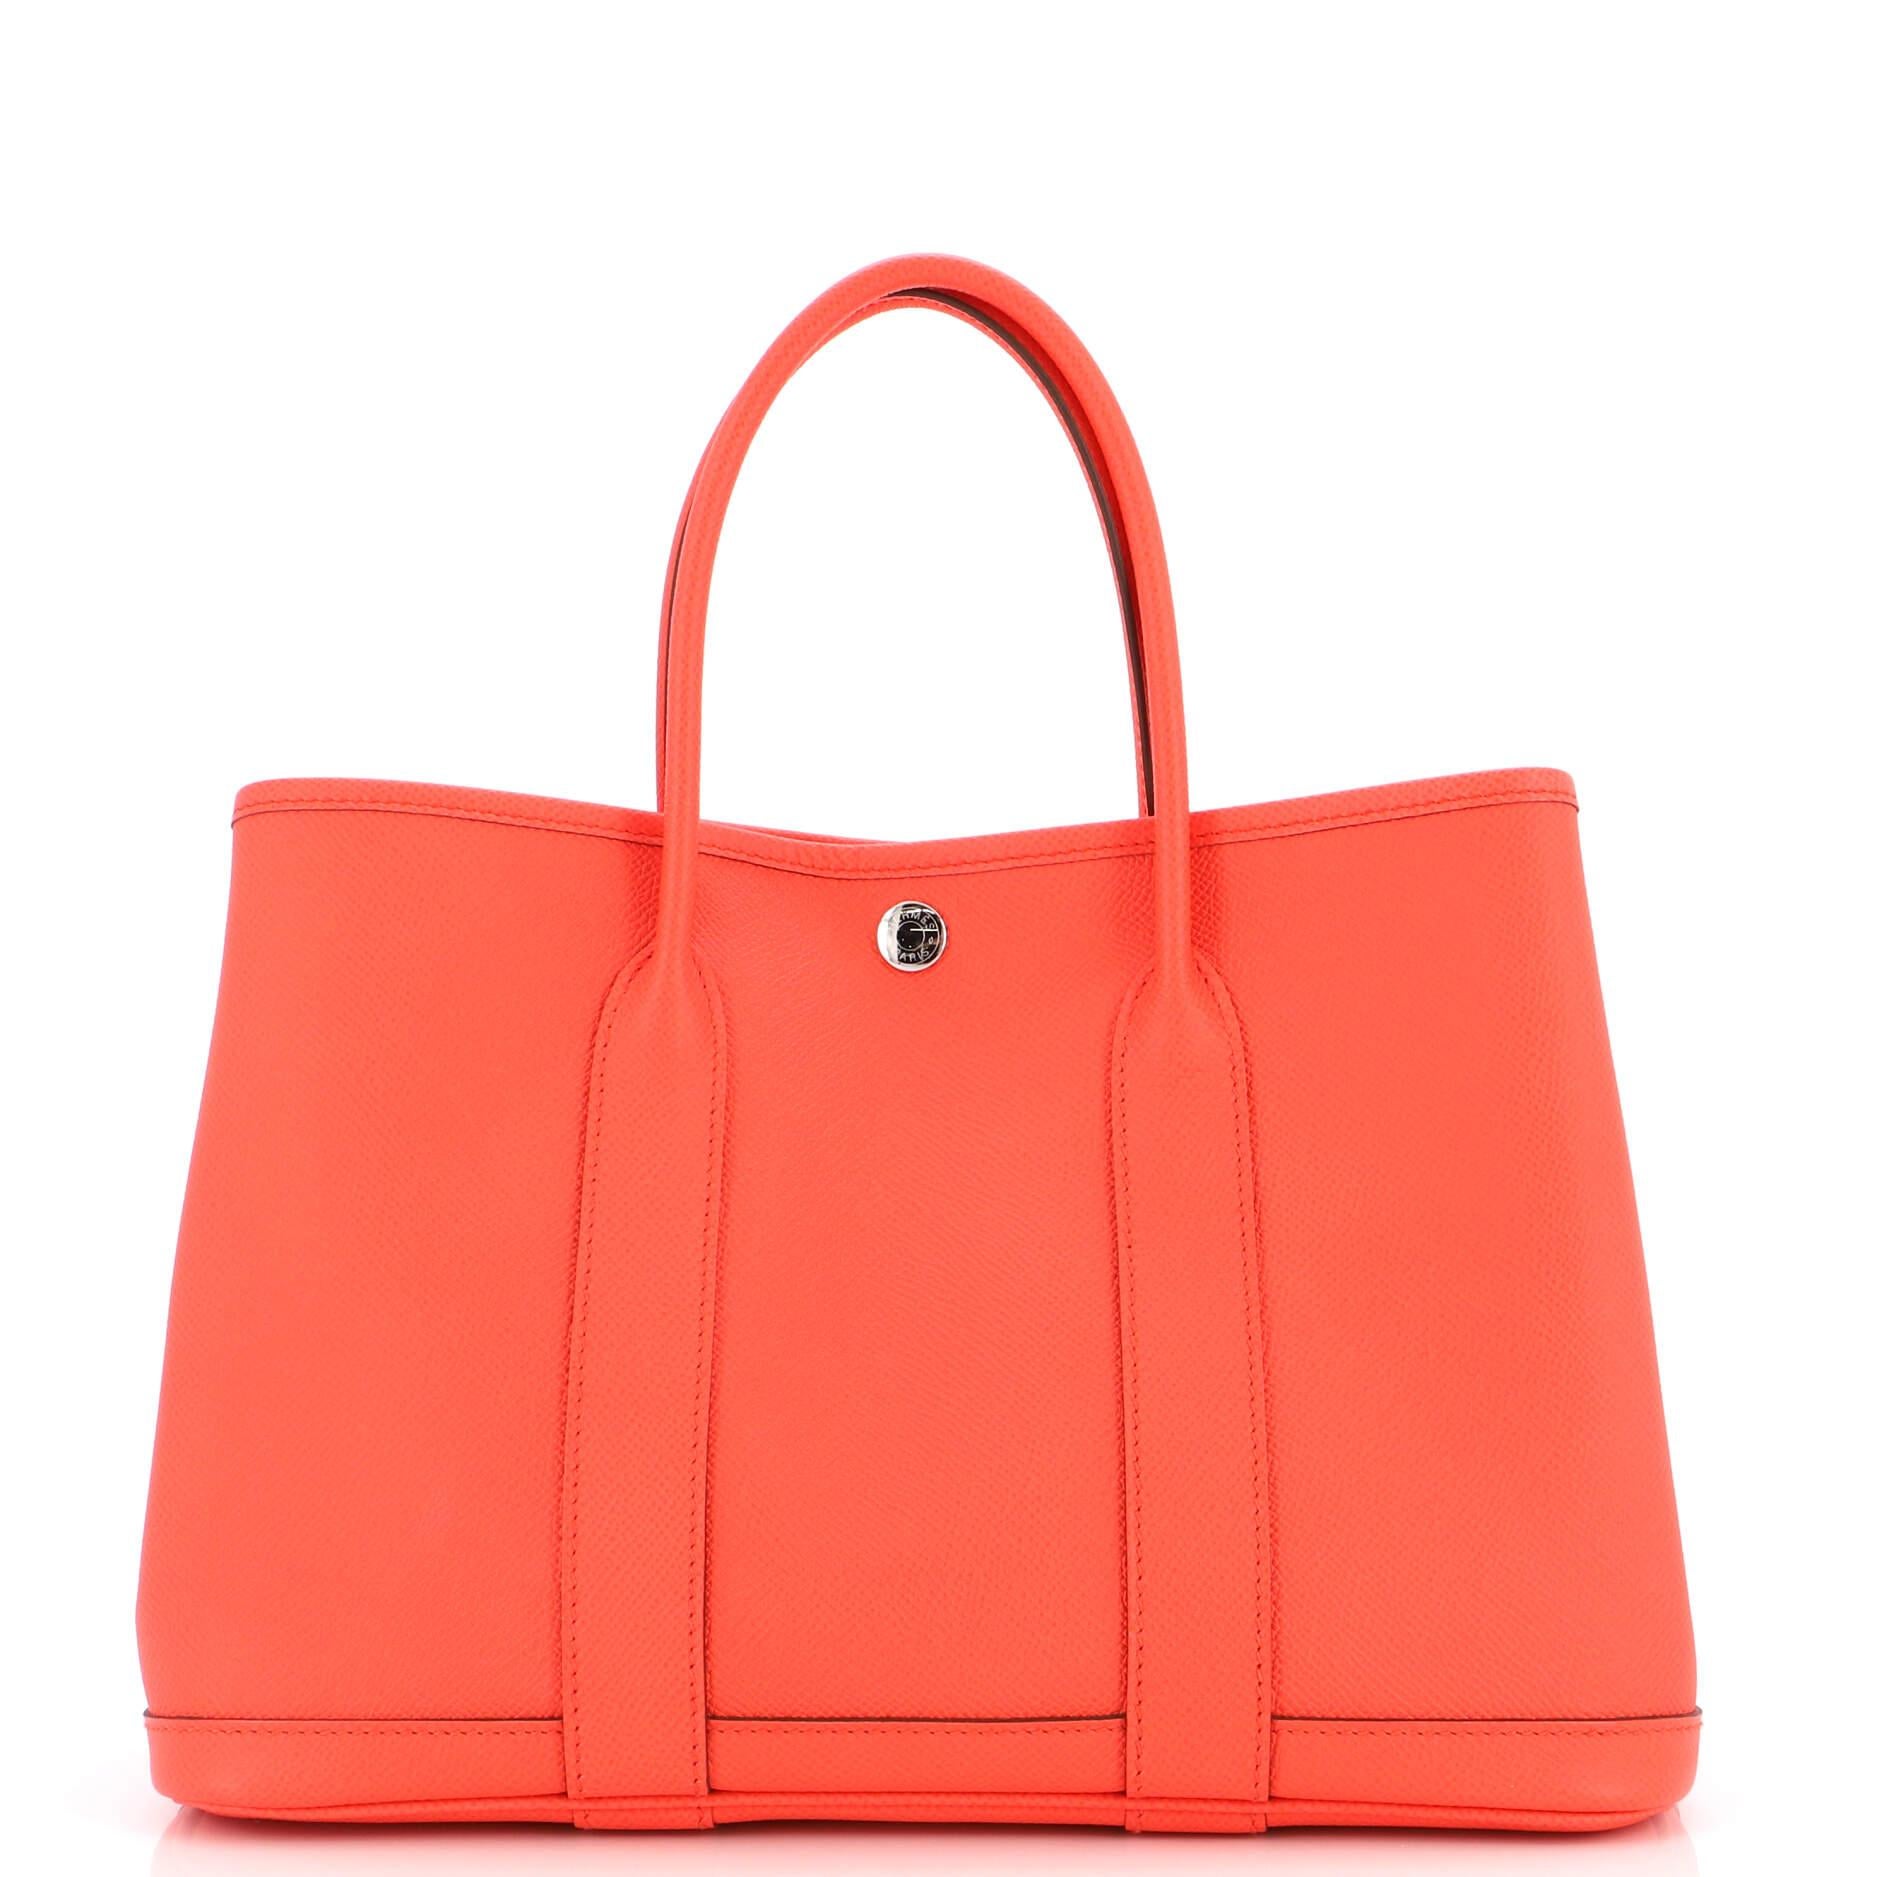 Women's or Men's Hermes Garden Party Tote Leather 30